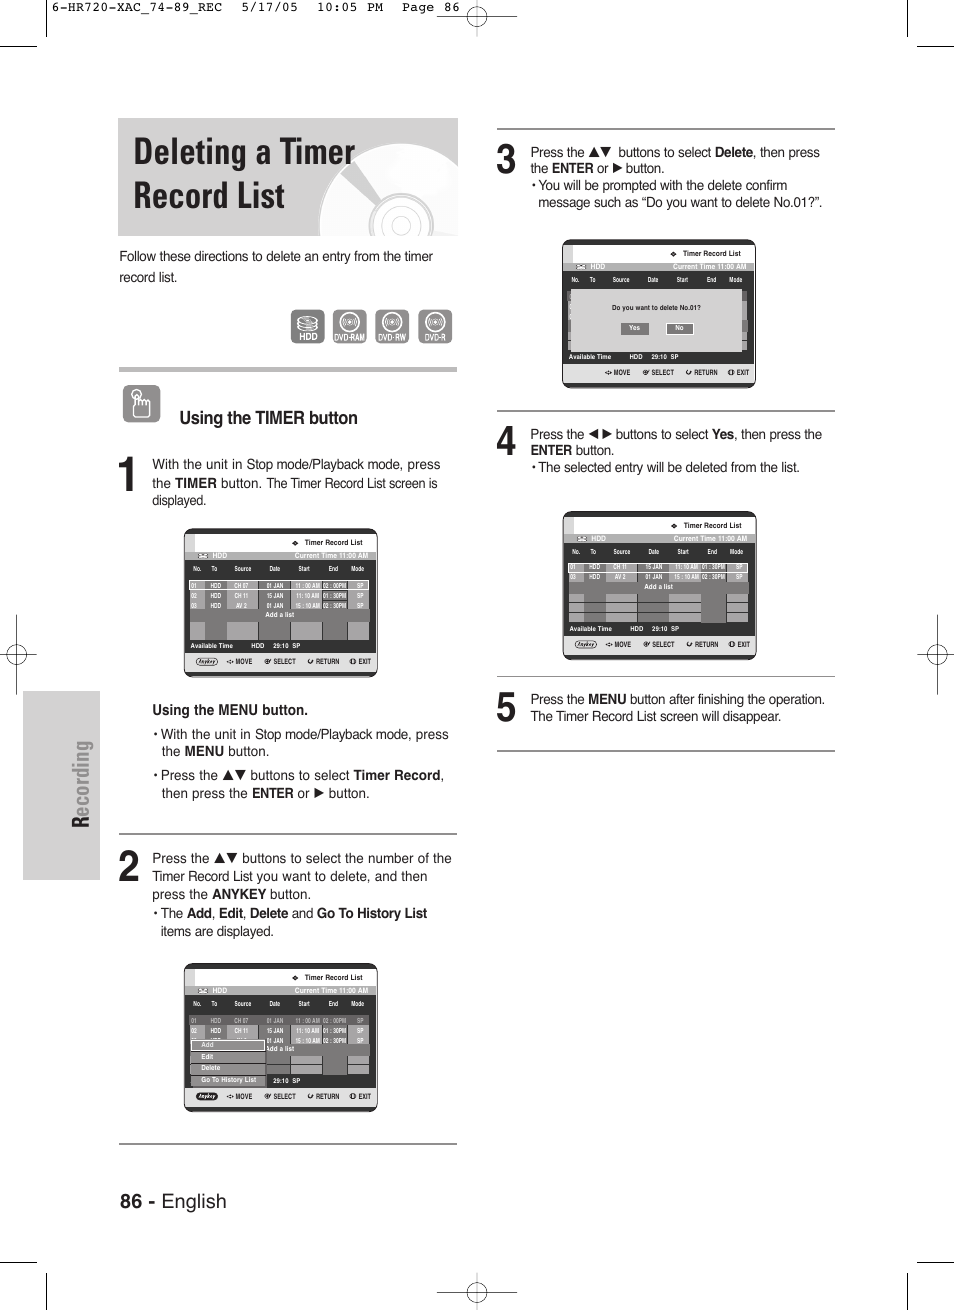 Deleting a timer record list, Recording, 86 - english | Samsung DVD-HR720  User Manual | Page 86 / 130